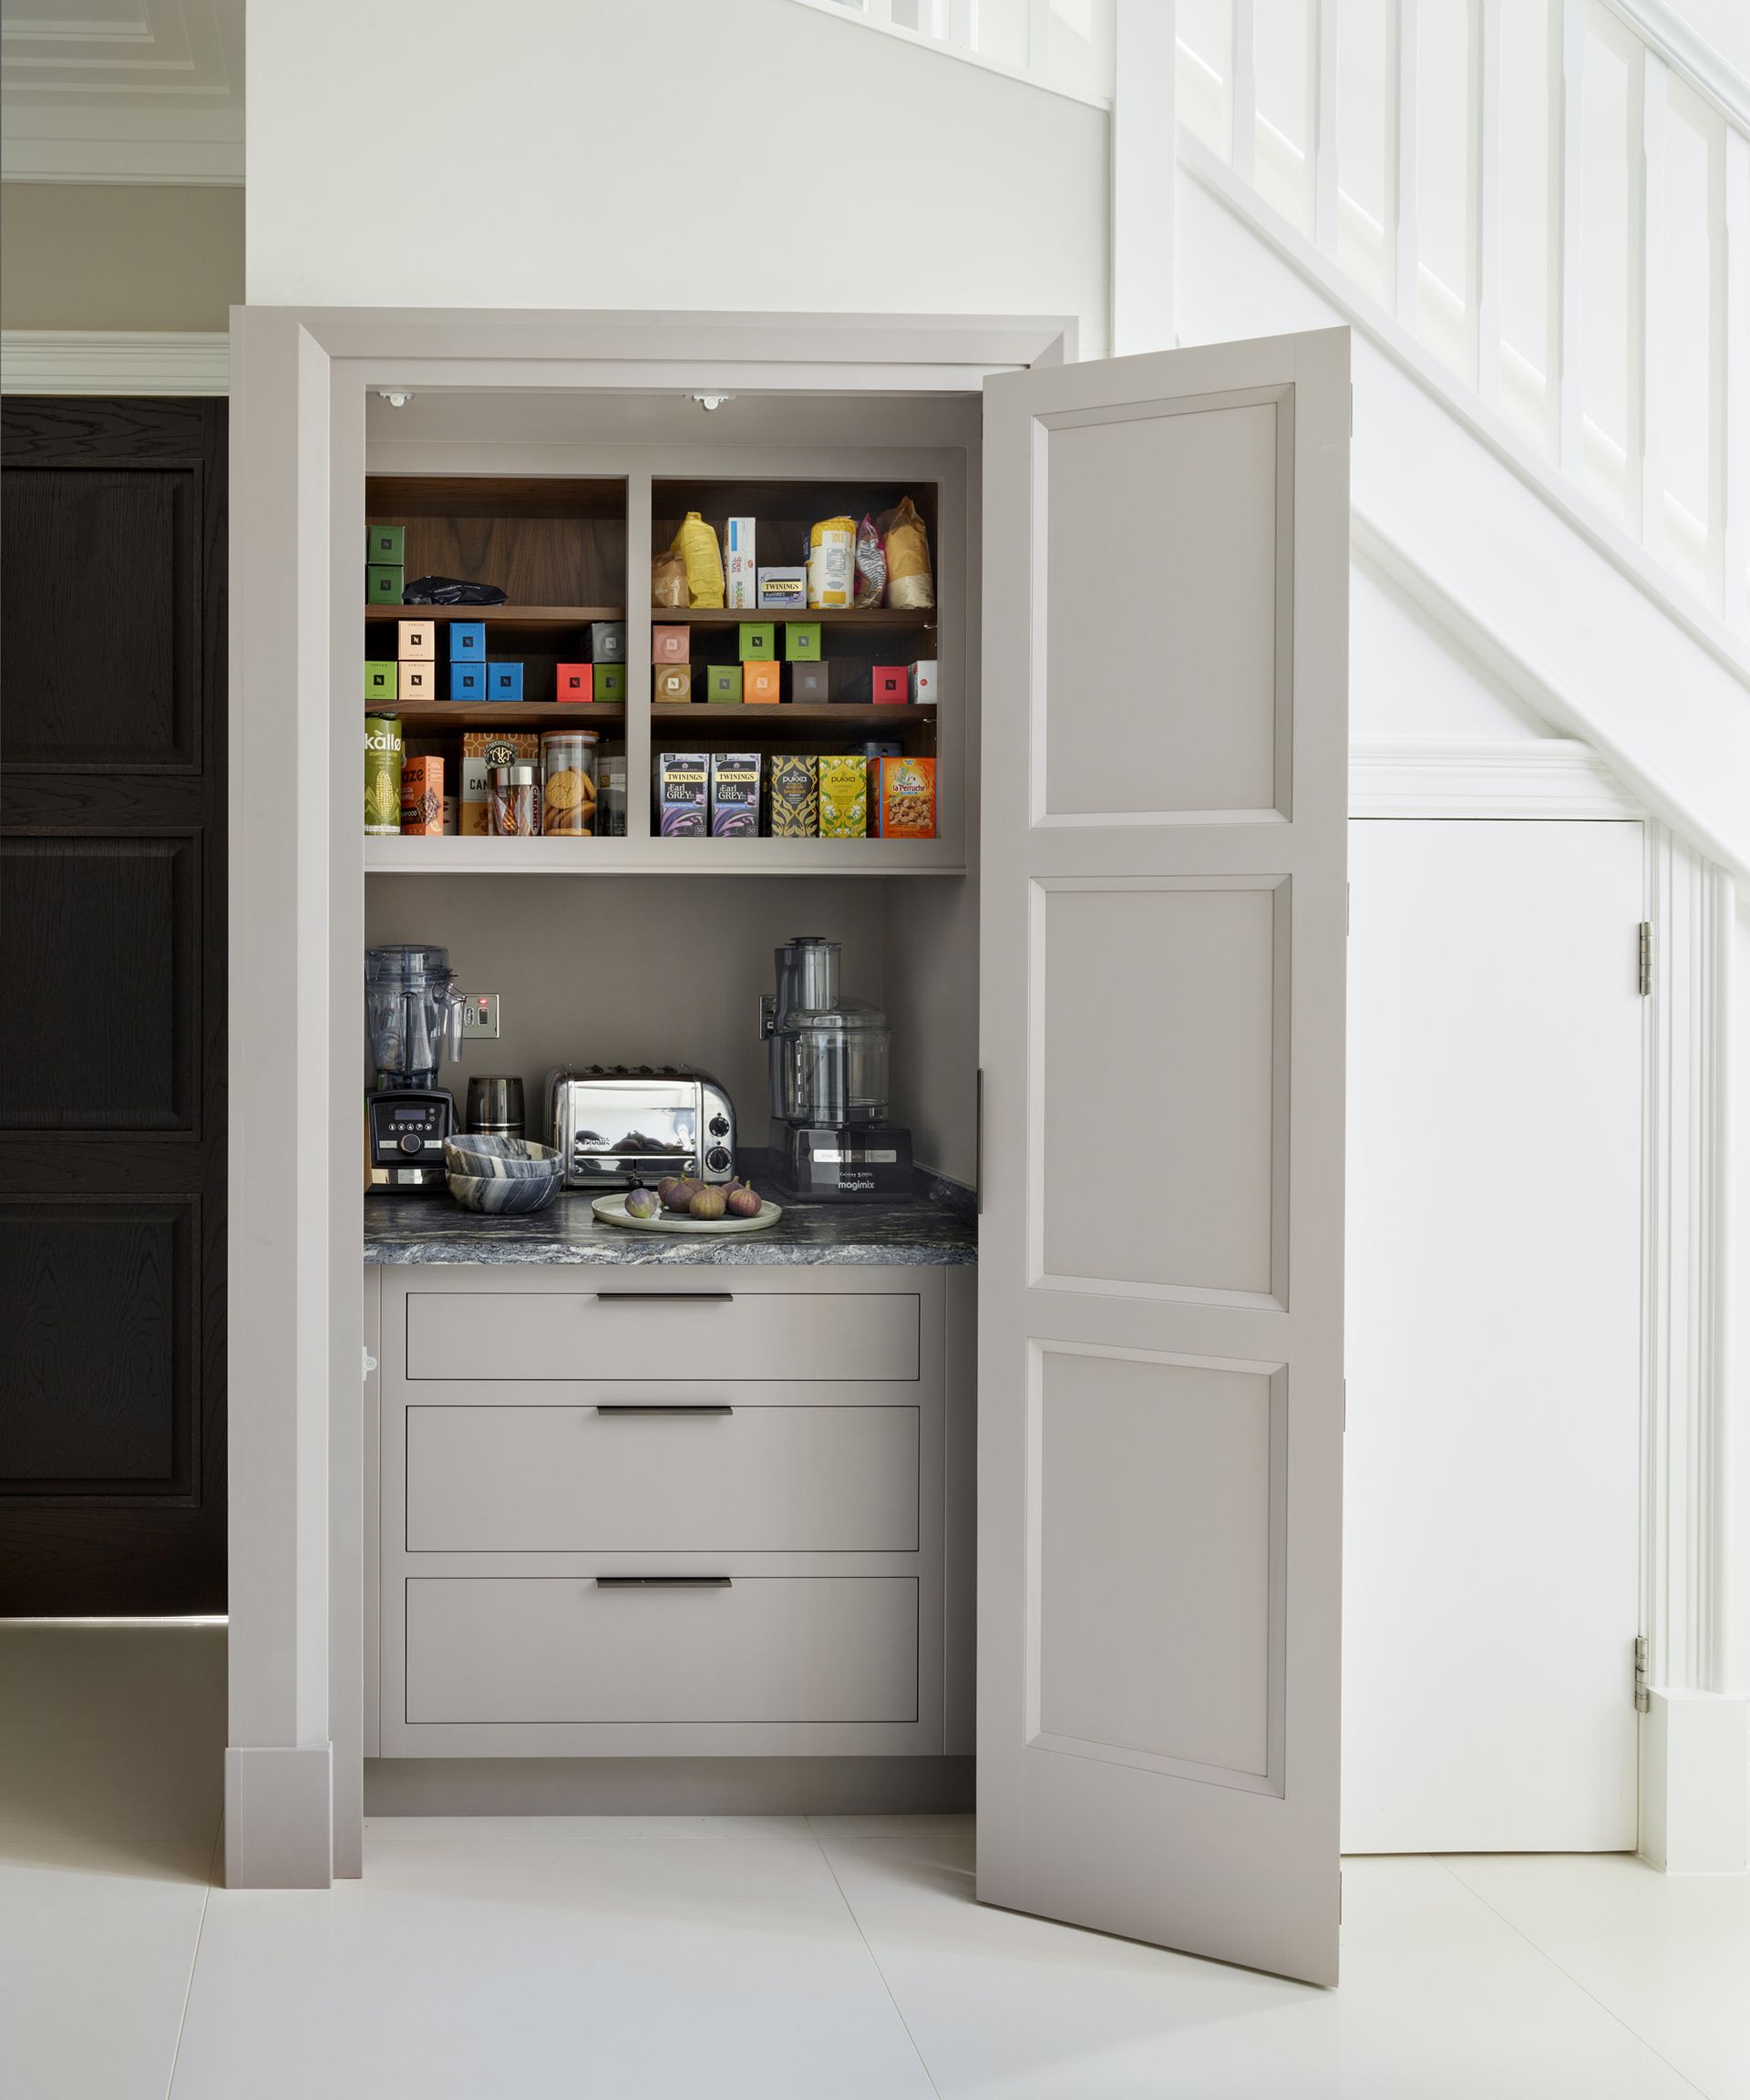 Kitchen cupboard storage ideas: Tips for designing functional cabinets